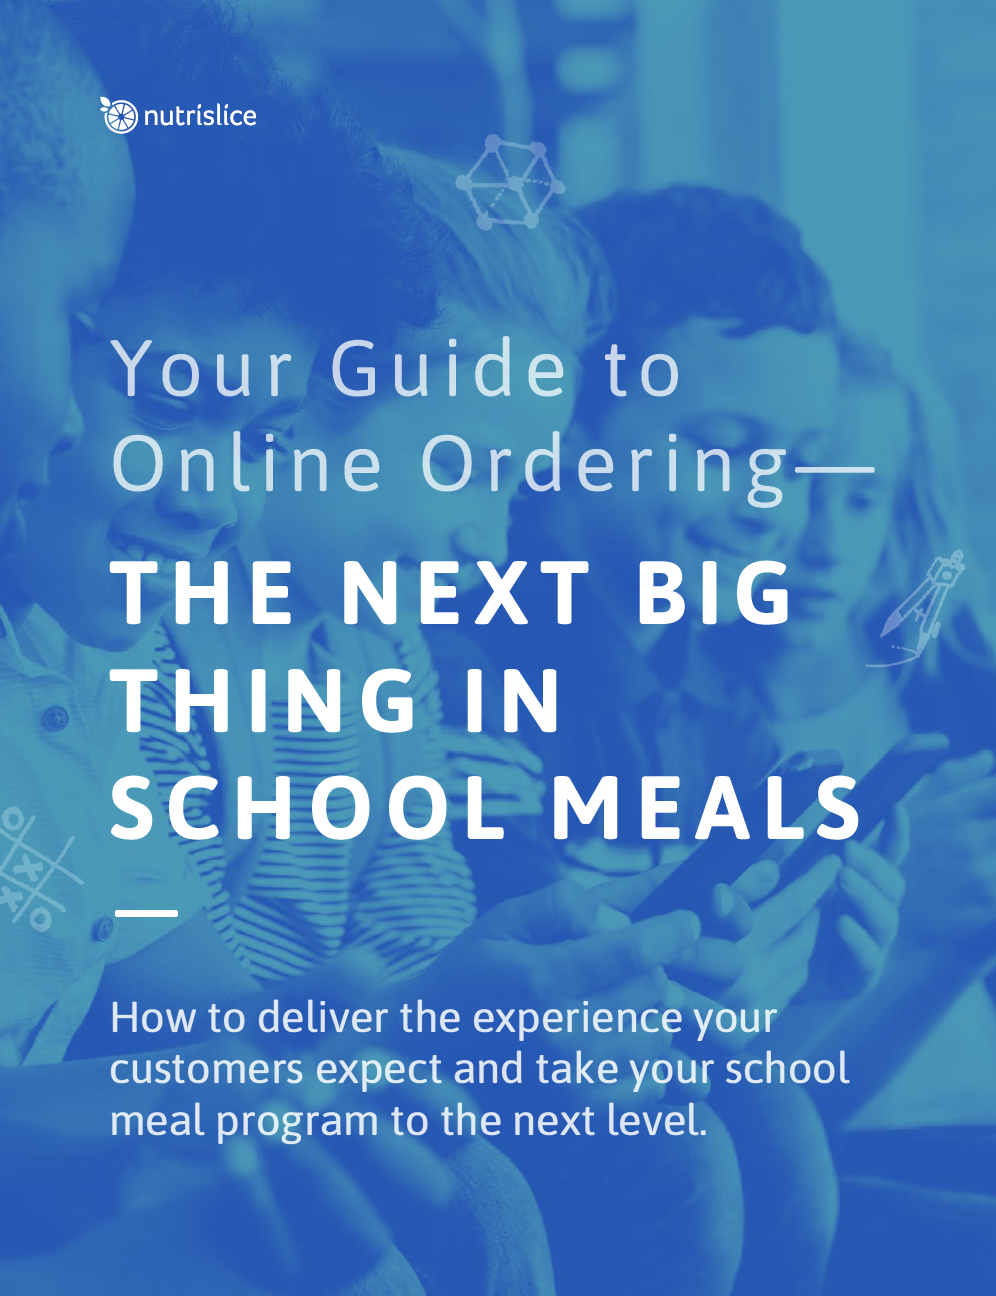 Nutrislice eBook Your Guide to Online Ordering—The Next Big Thing in School Meals.pdf 2019-01-29 20-23-51